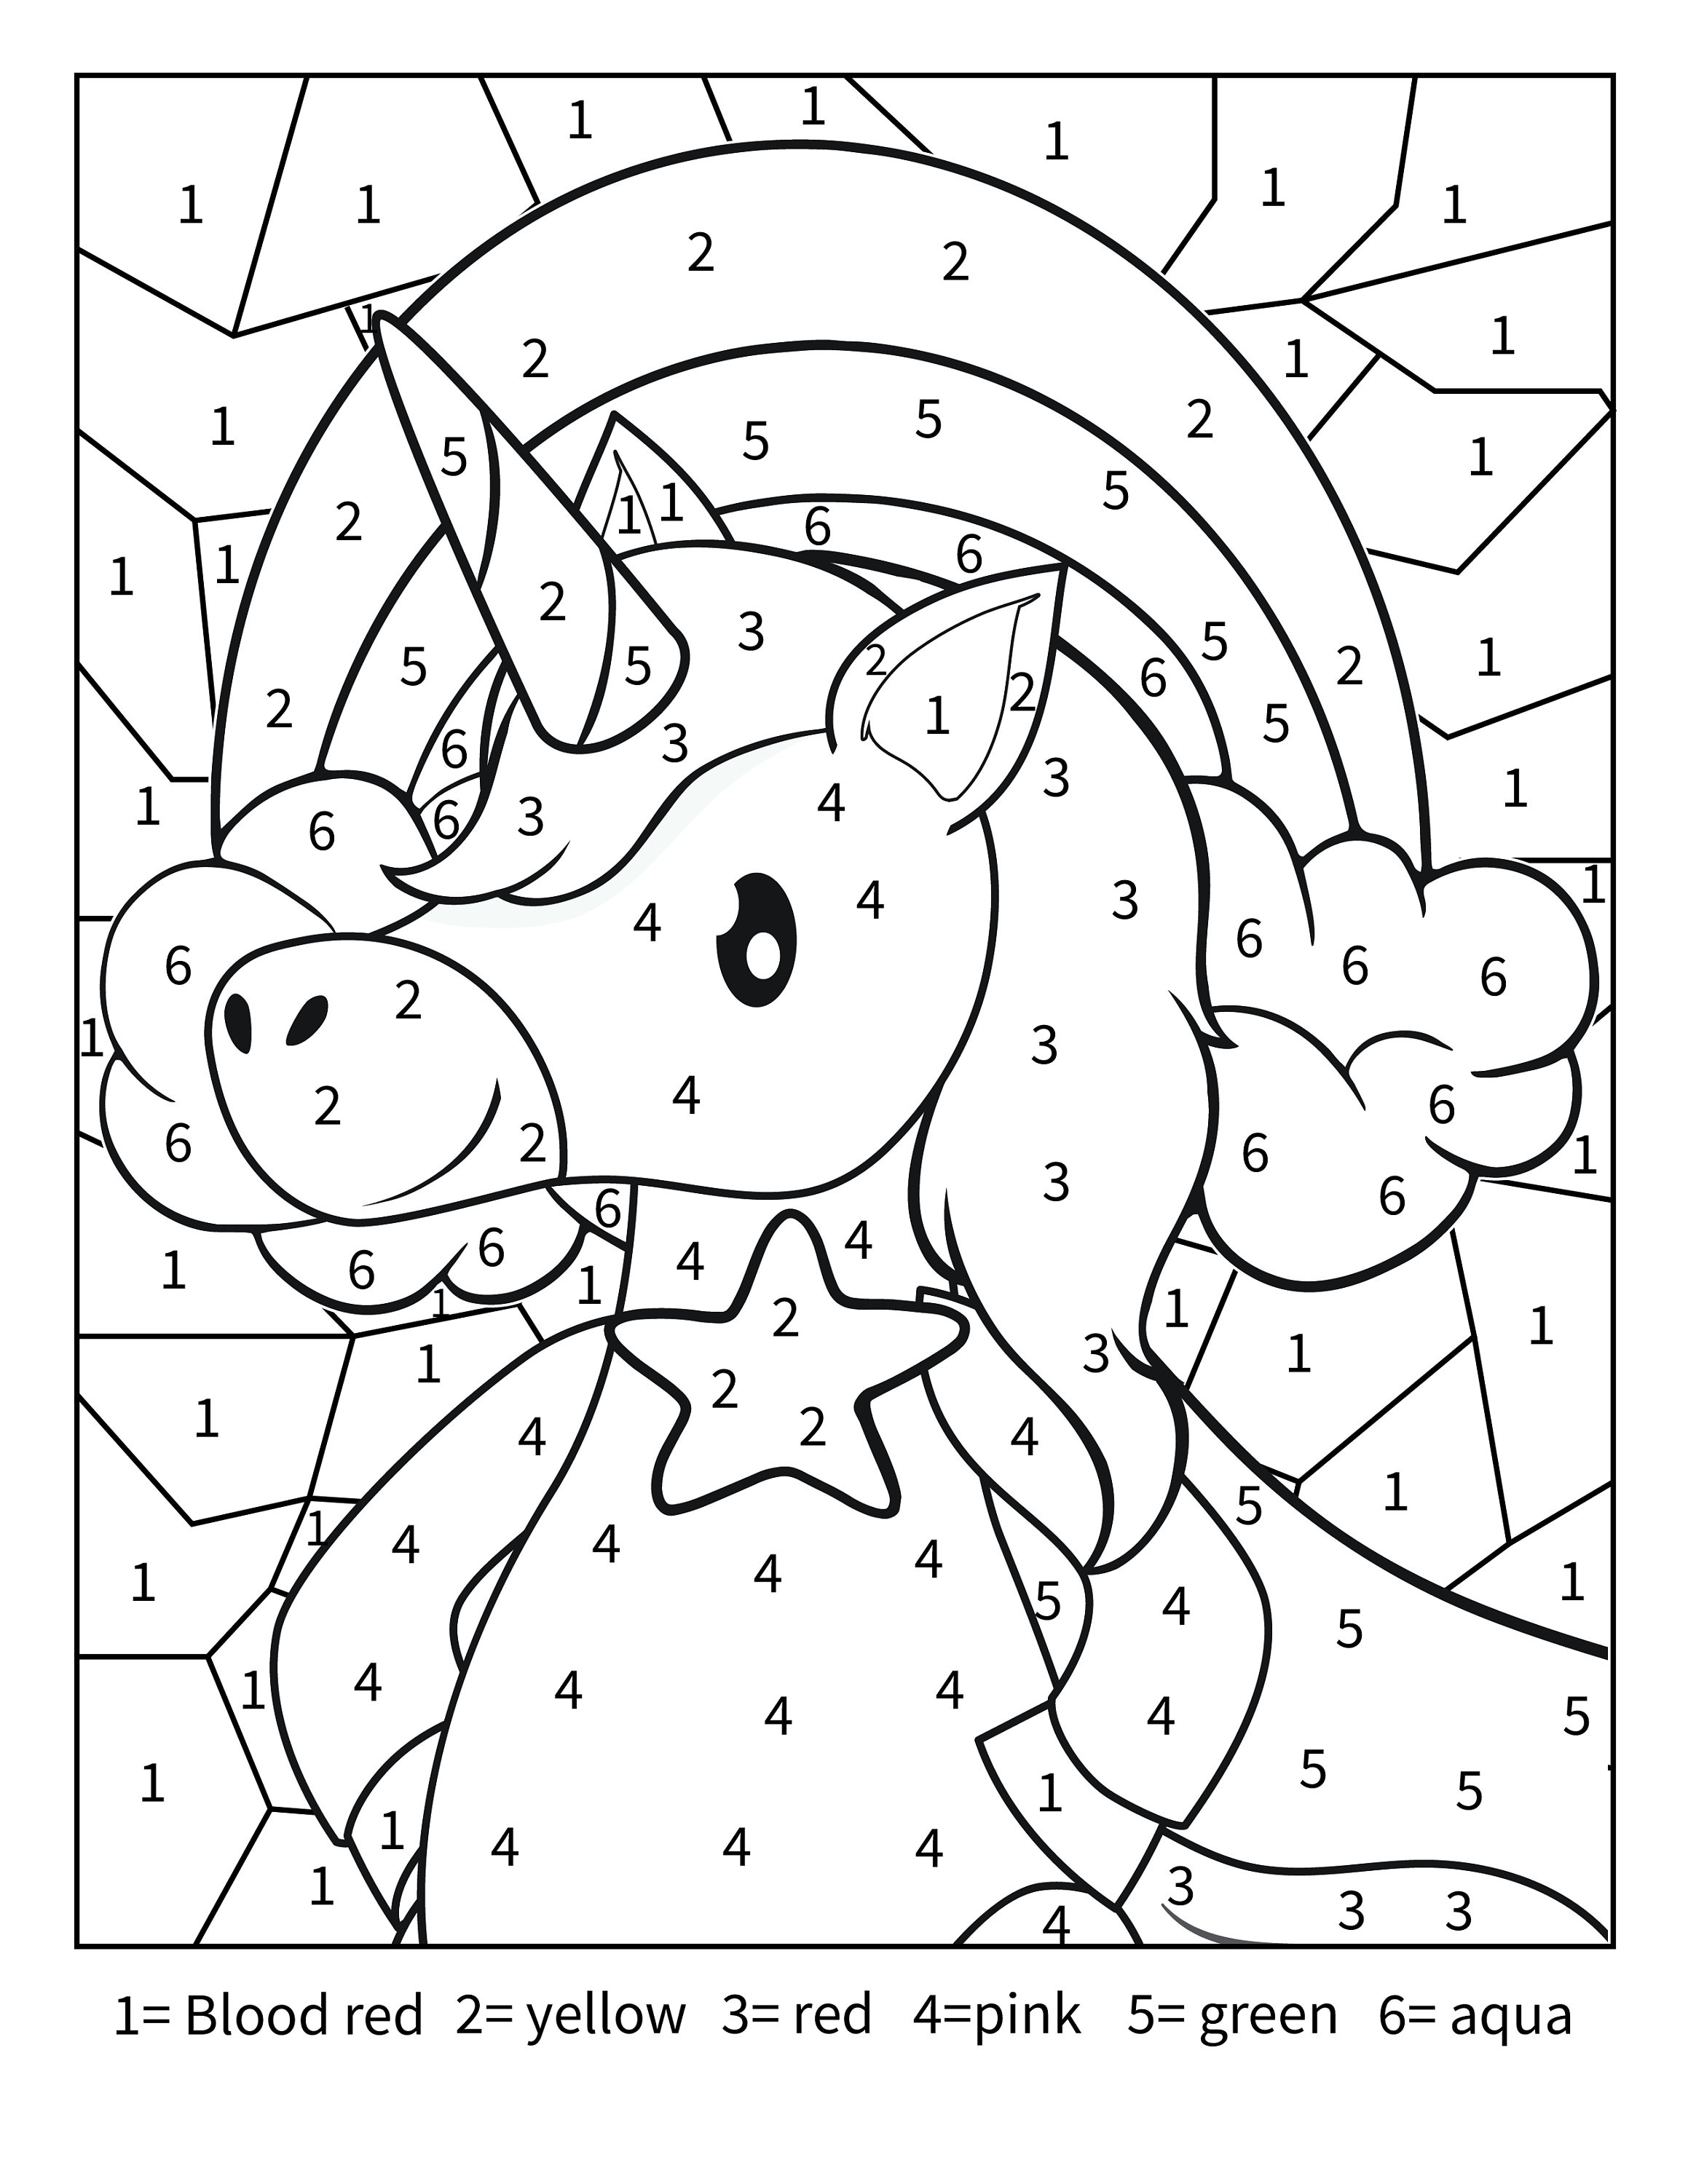 Printable unicorn color by number activity page for toddlers kids and adults